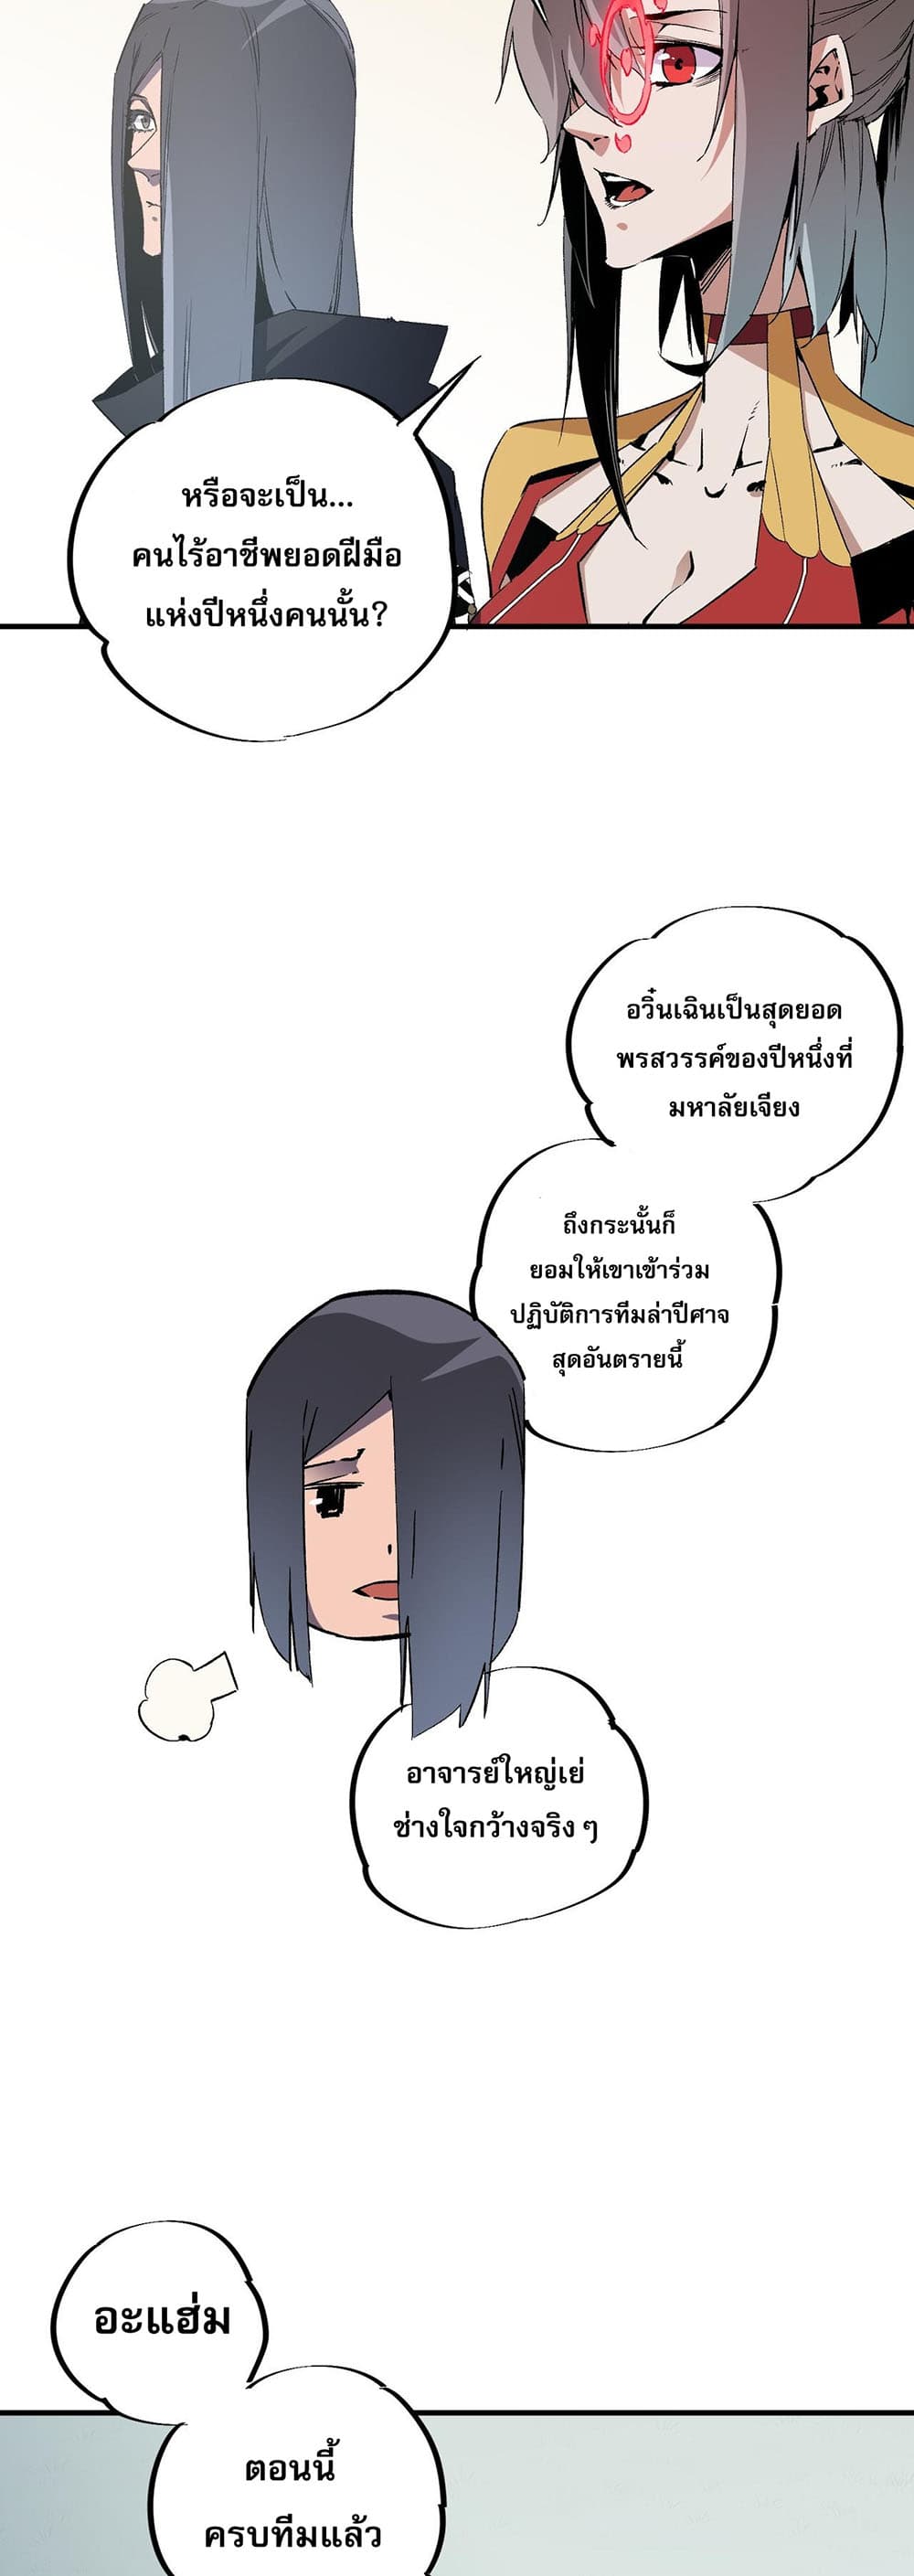 Job Changing for the Entire Population: The Jobless Me Will Terminate the Gods ฉันคือผู้เล่นไร้อาชีพที่สังหารเหล่าเทพ 51-51